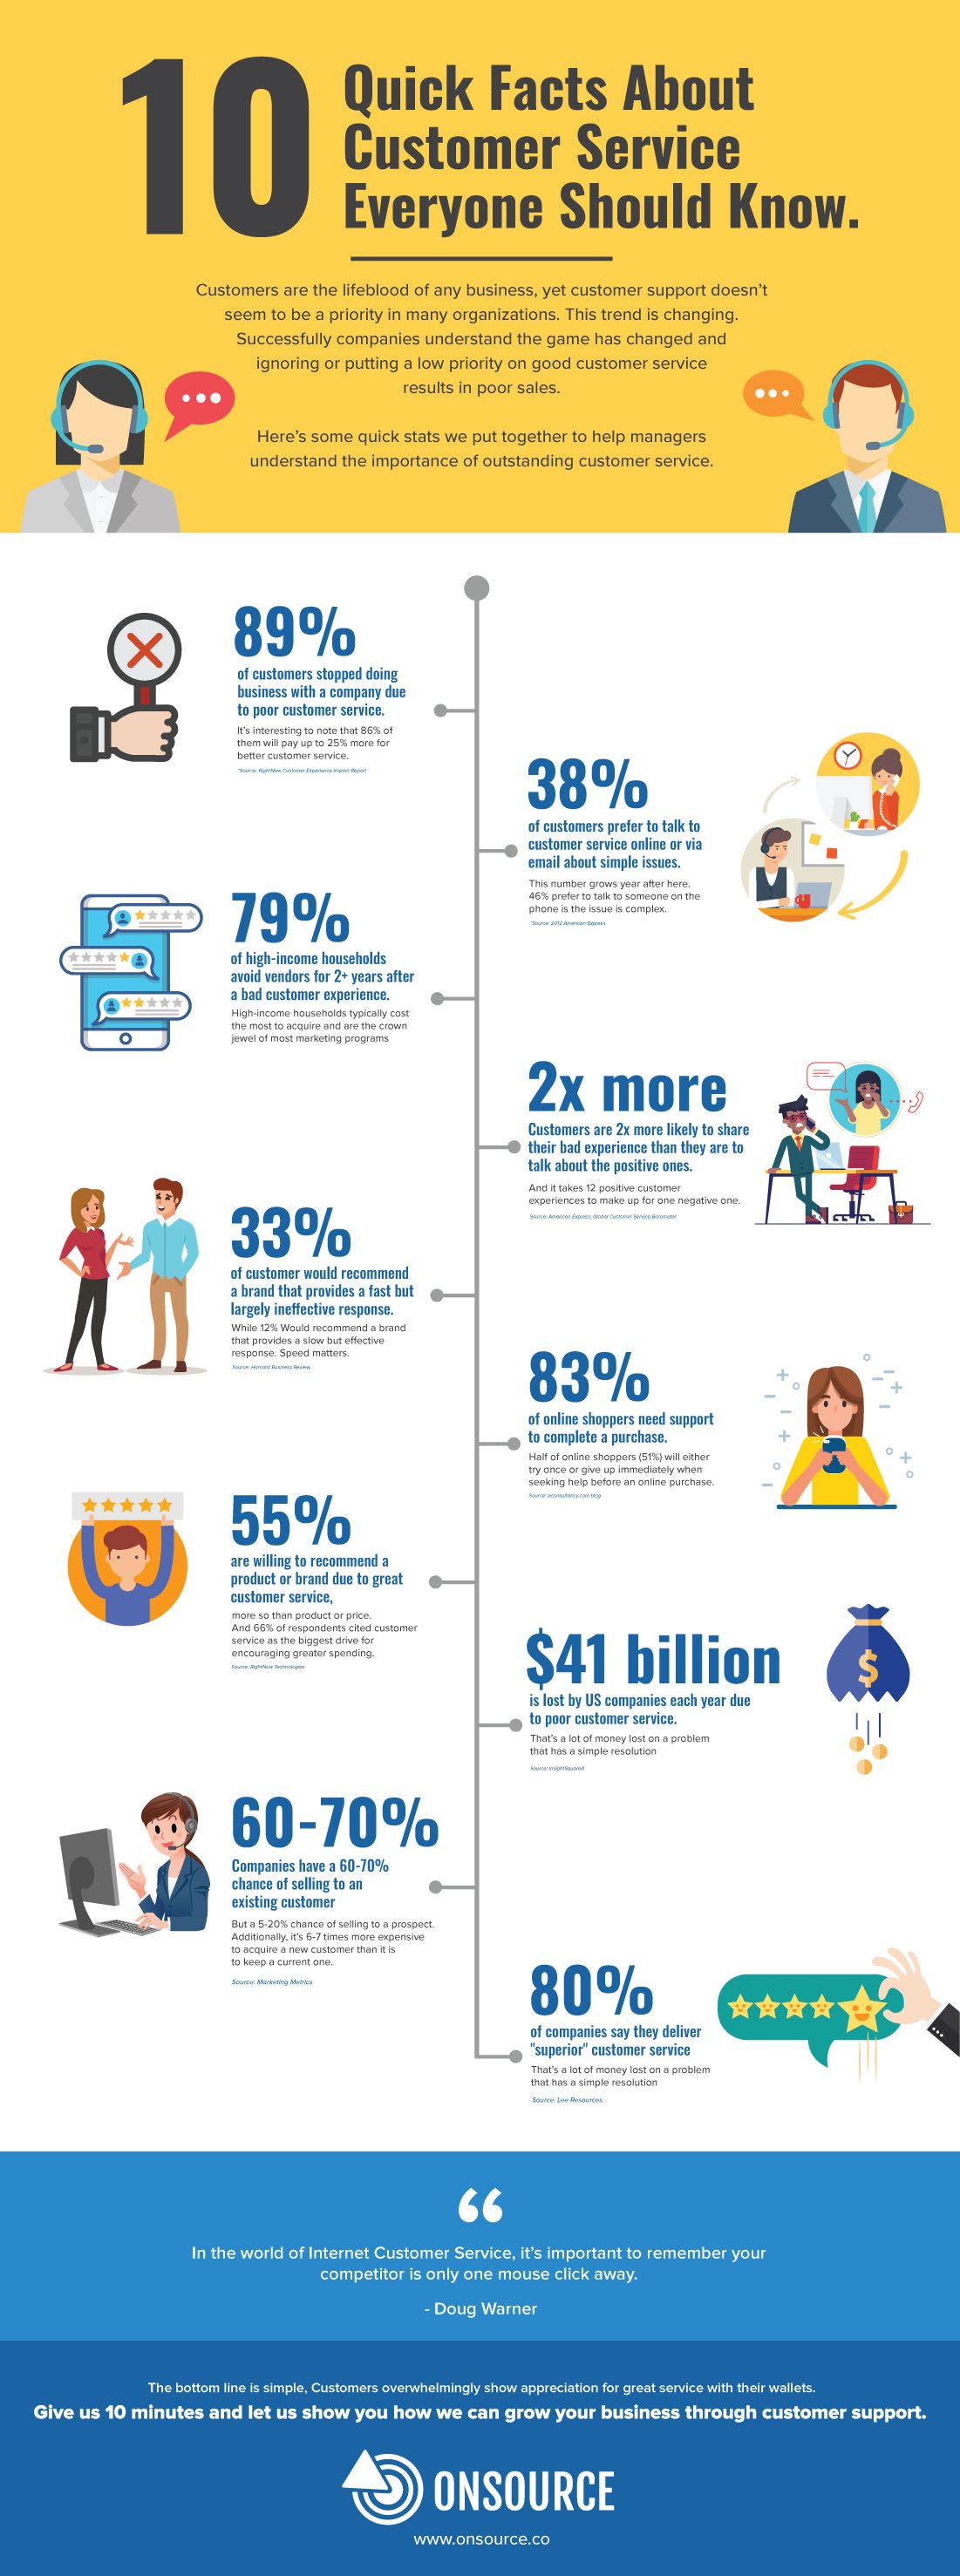 10 Quick Facts About Customer Service Everyone Should Know #infographic